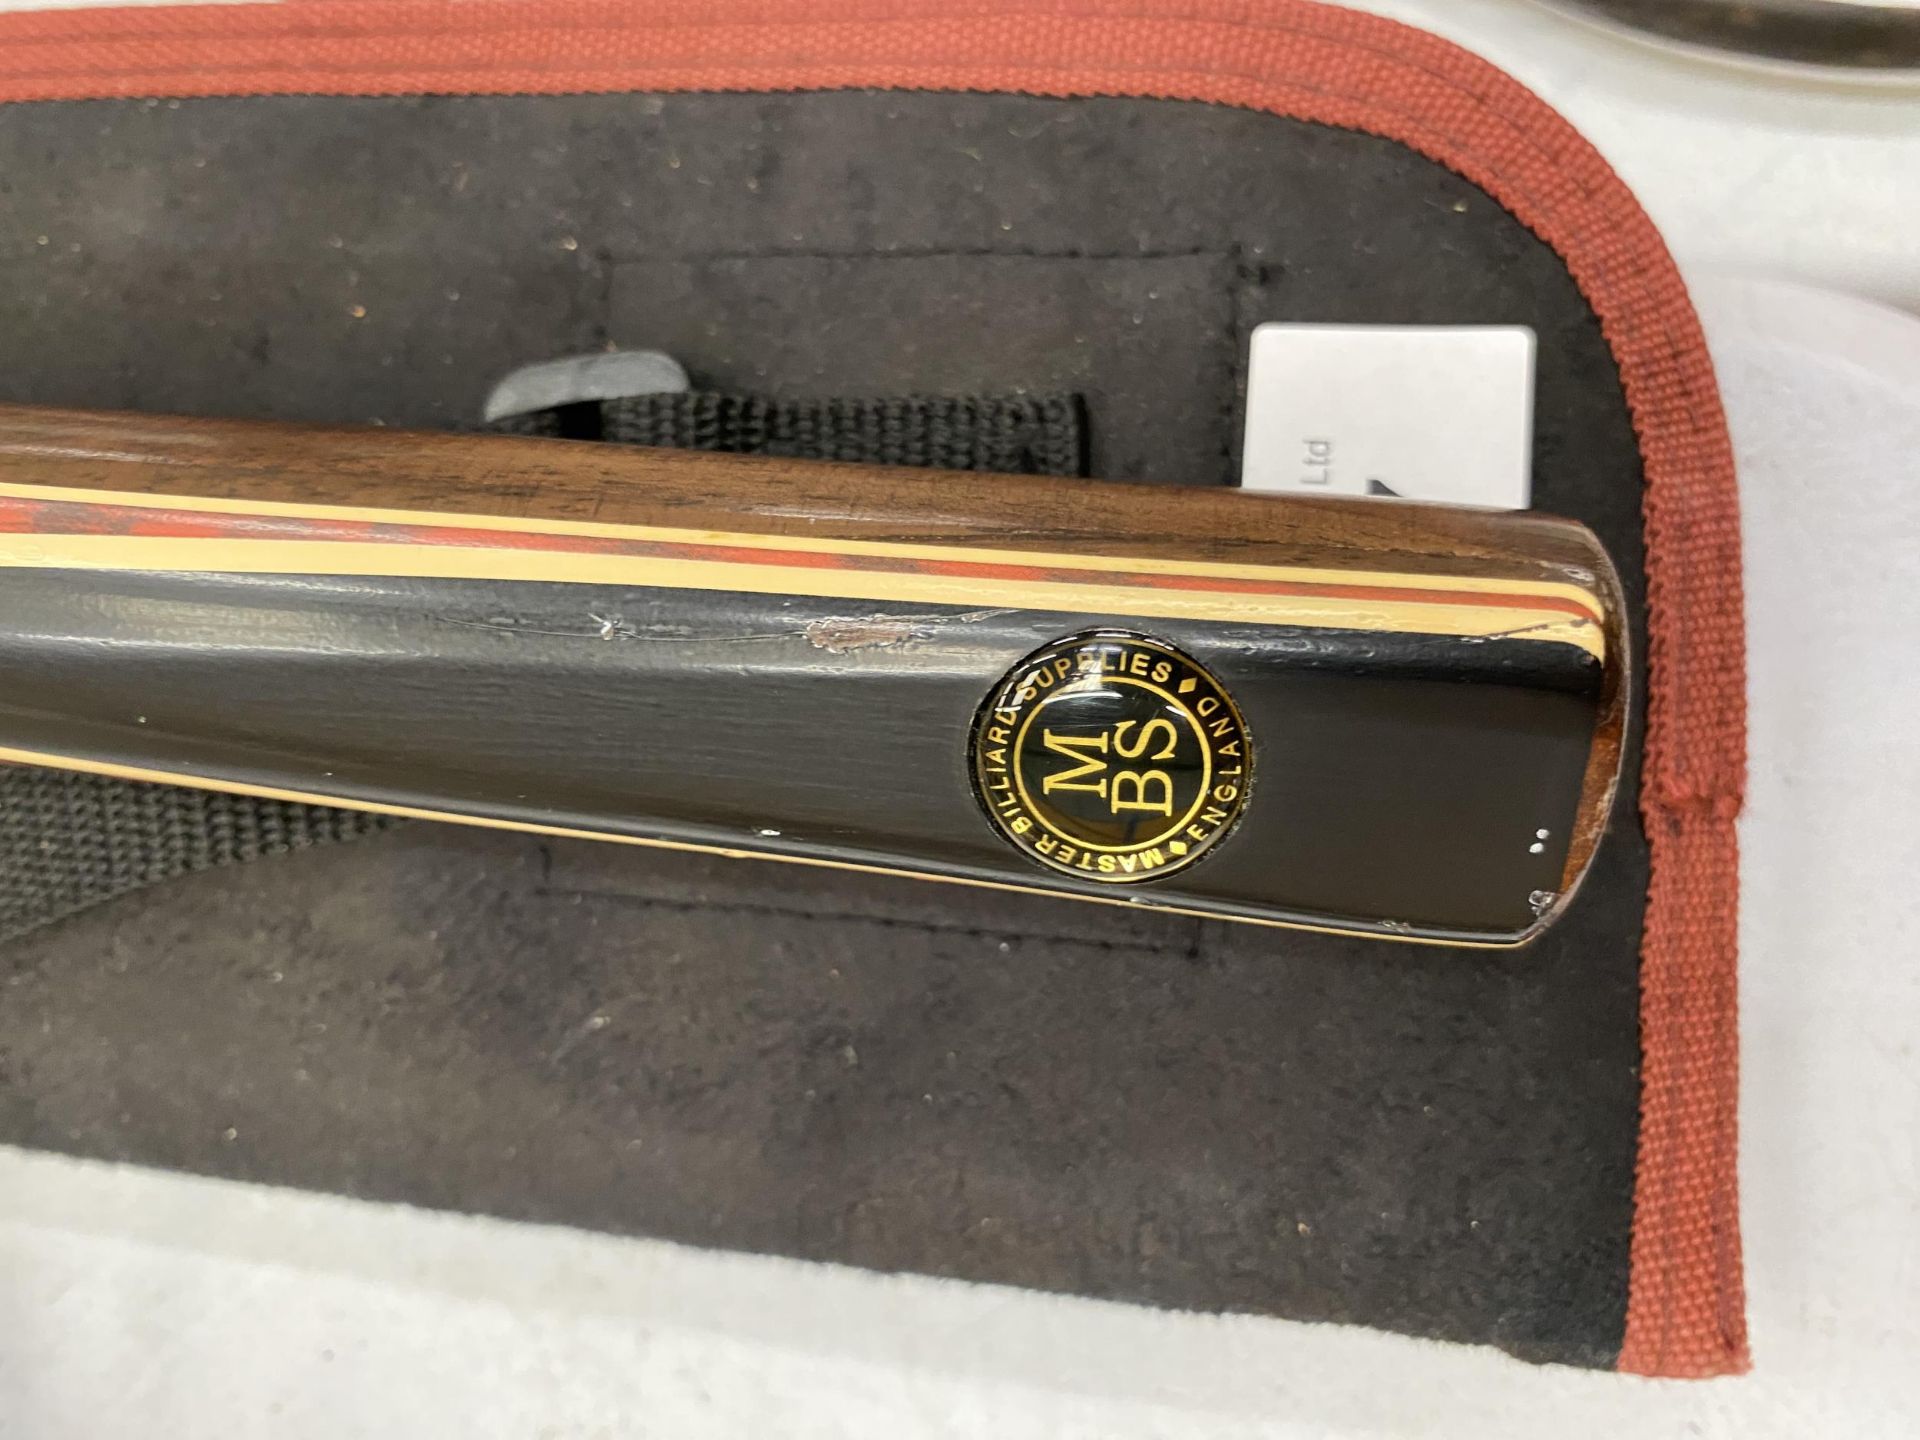 A SNOOKER CUE IN A CASE - Image 2 of 2